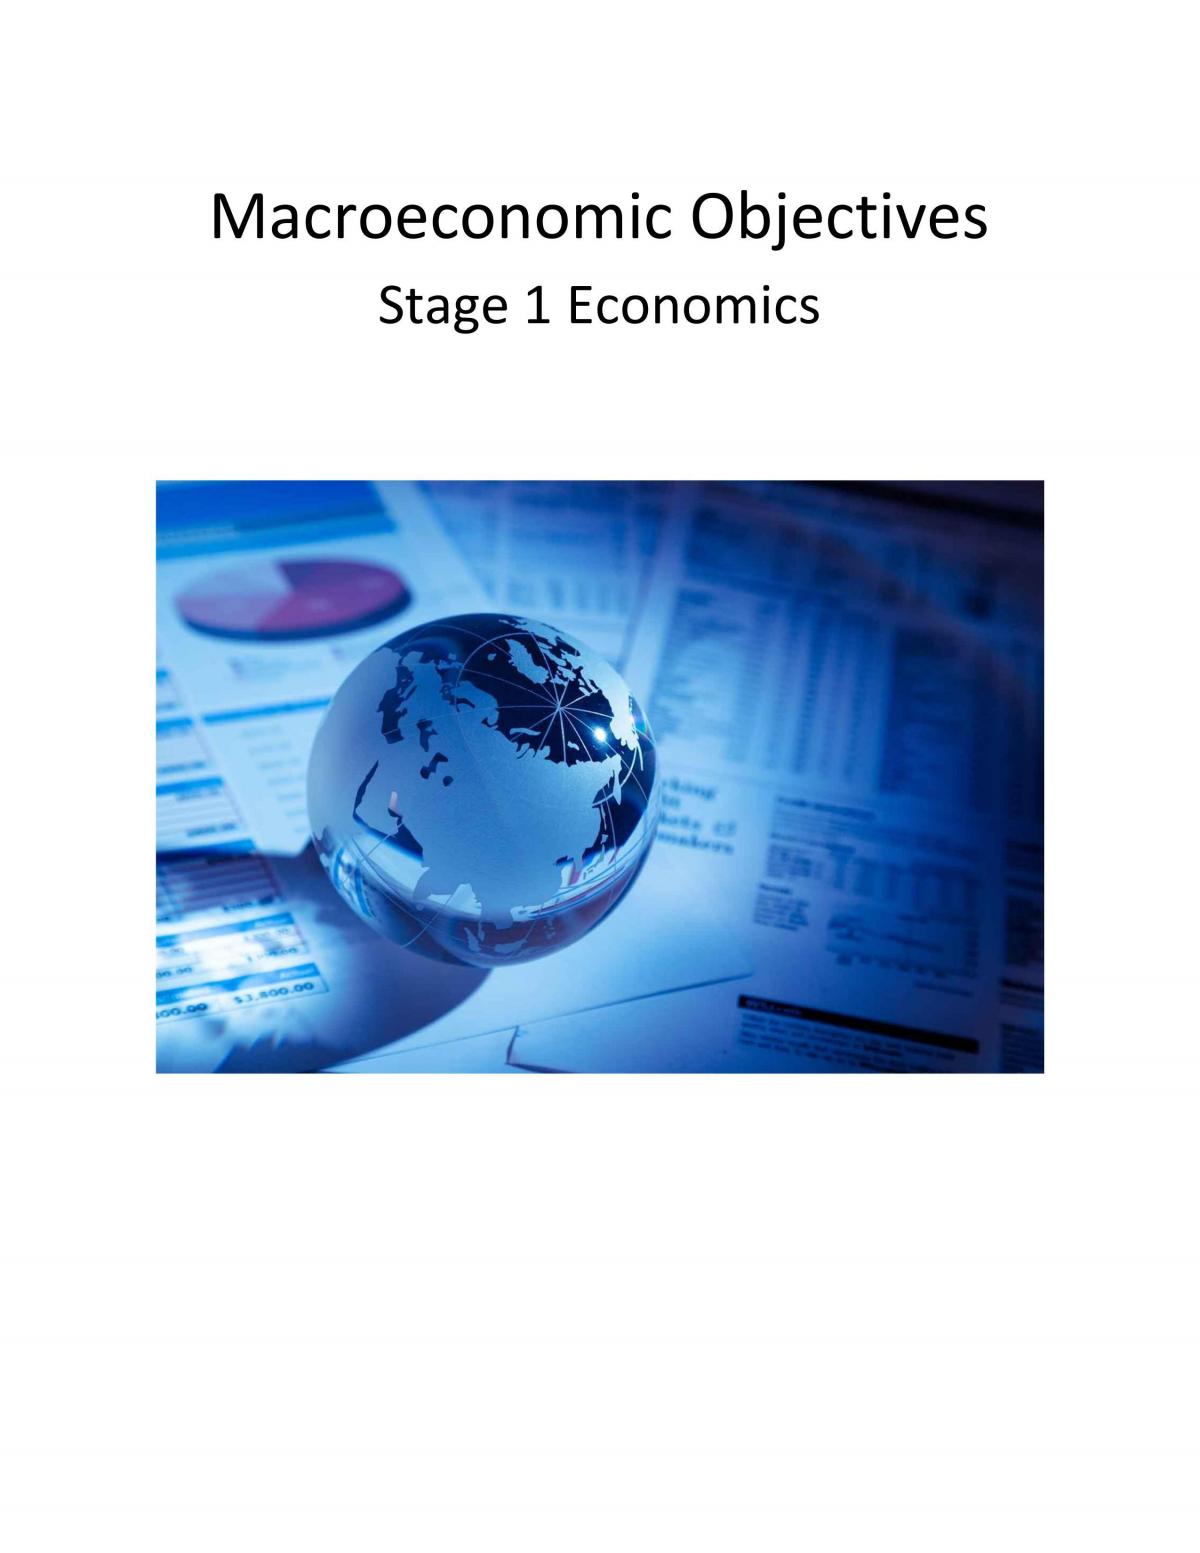 Macroeconomic Objectives - Page 1